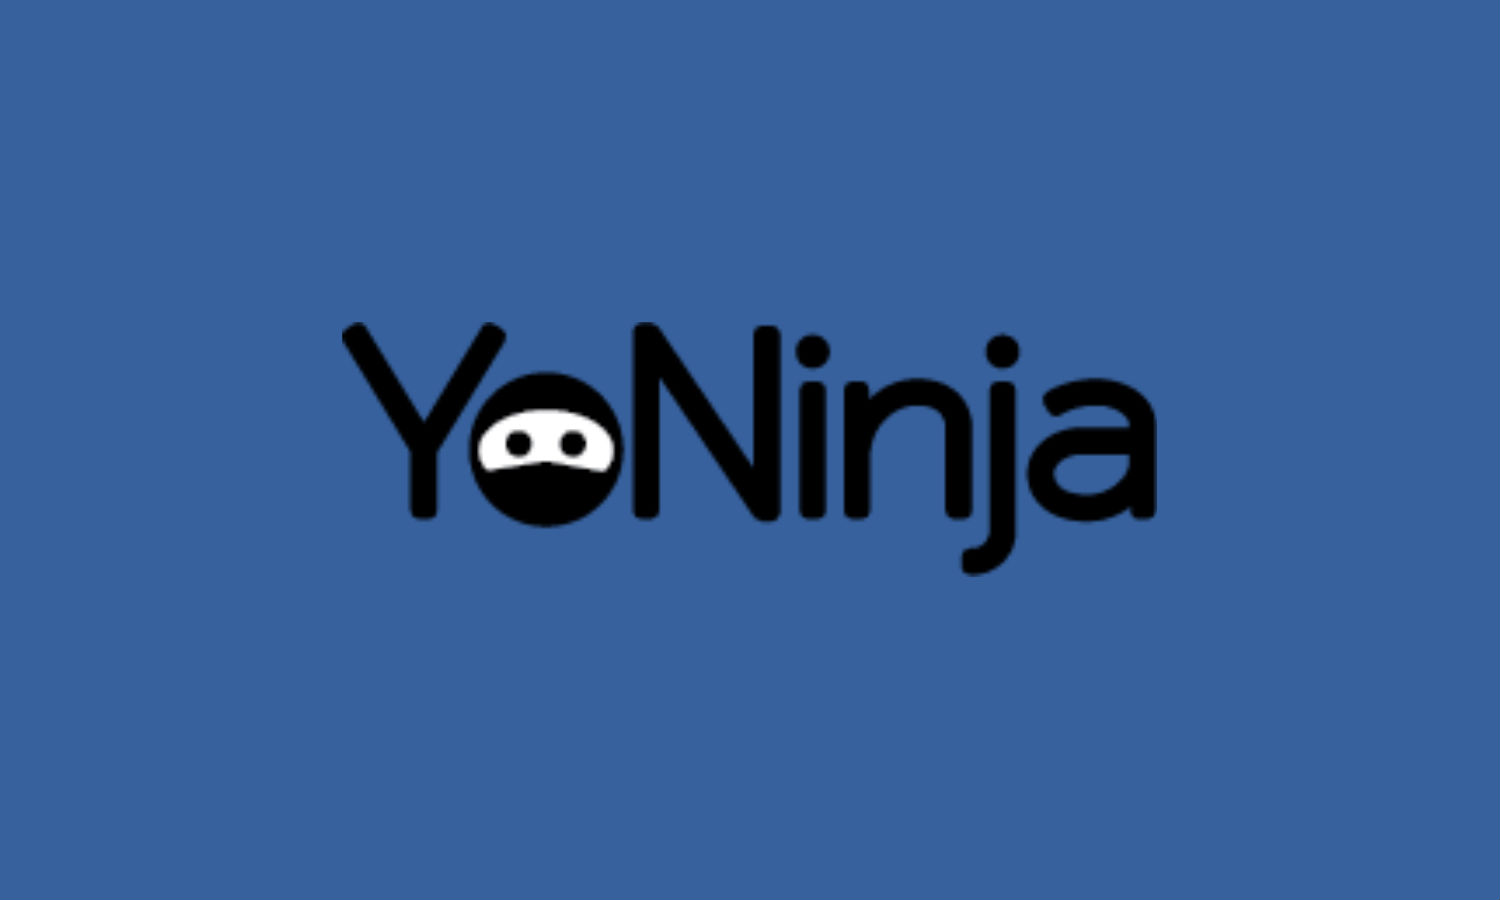 The birth of Findinjp.com, and its transition to YoNinja.com